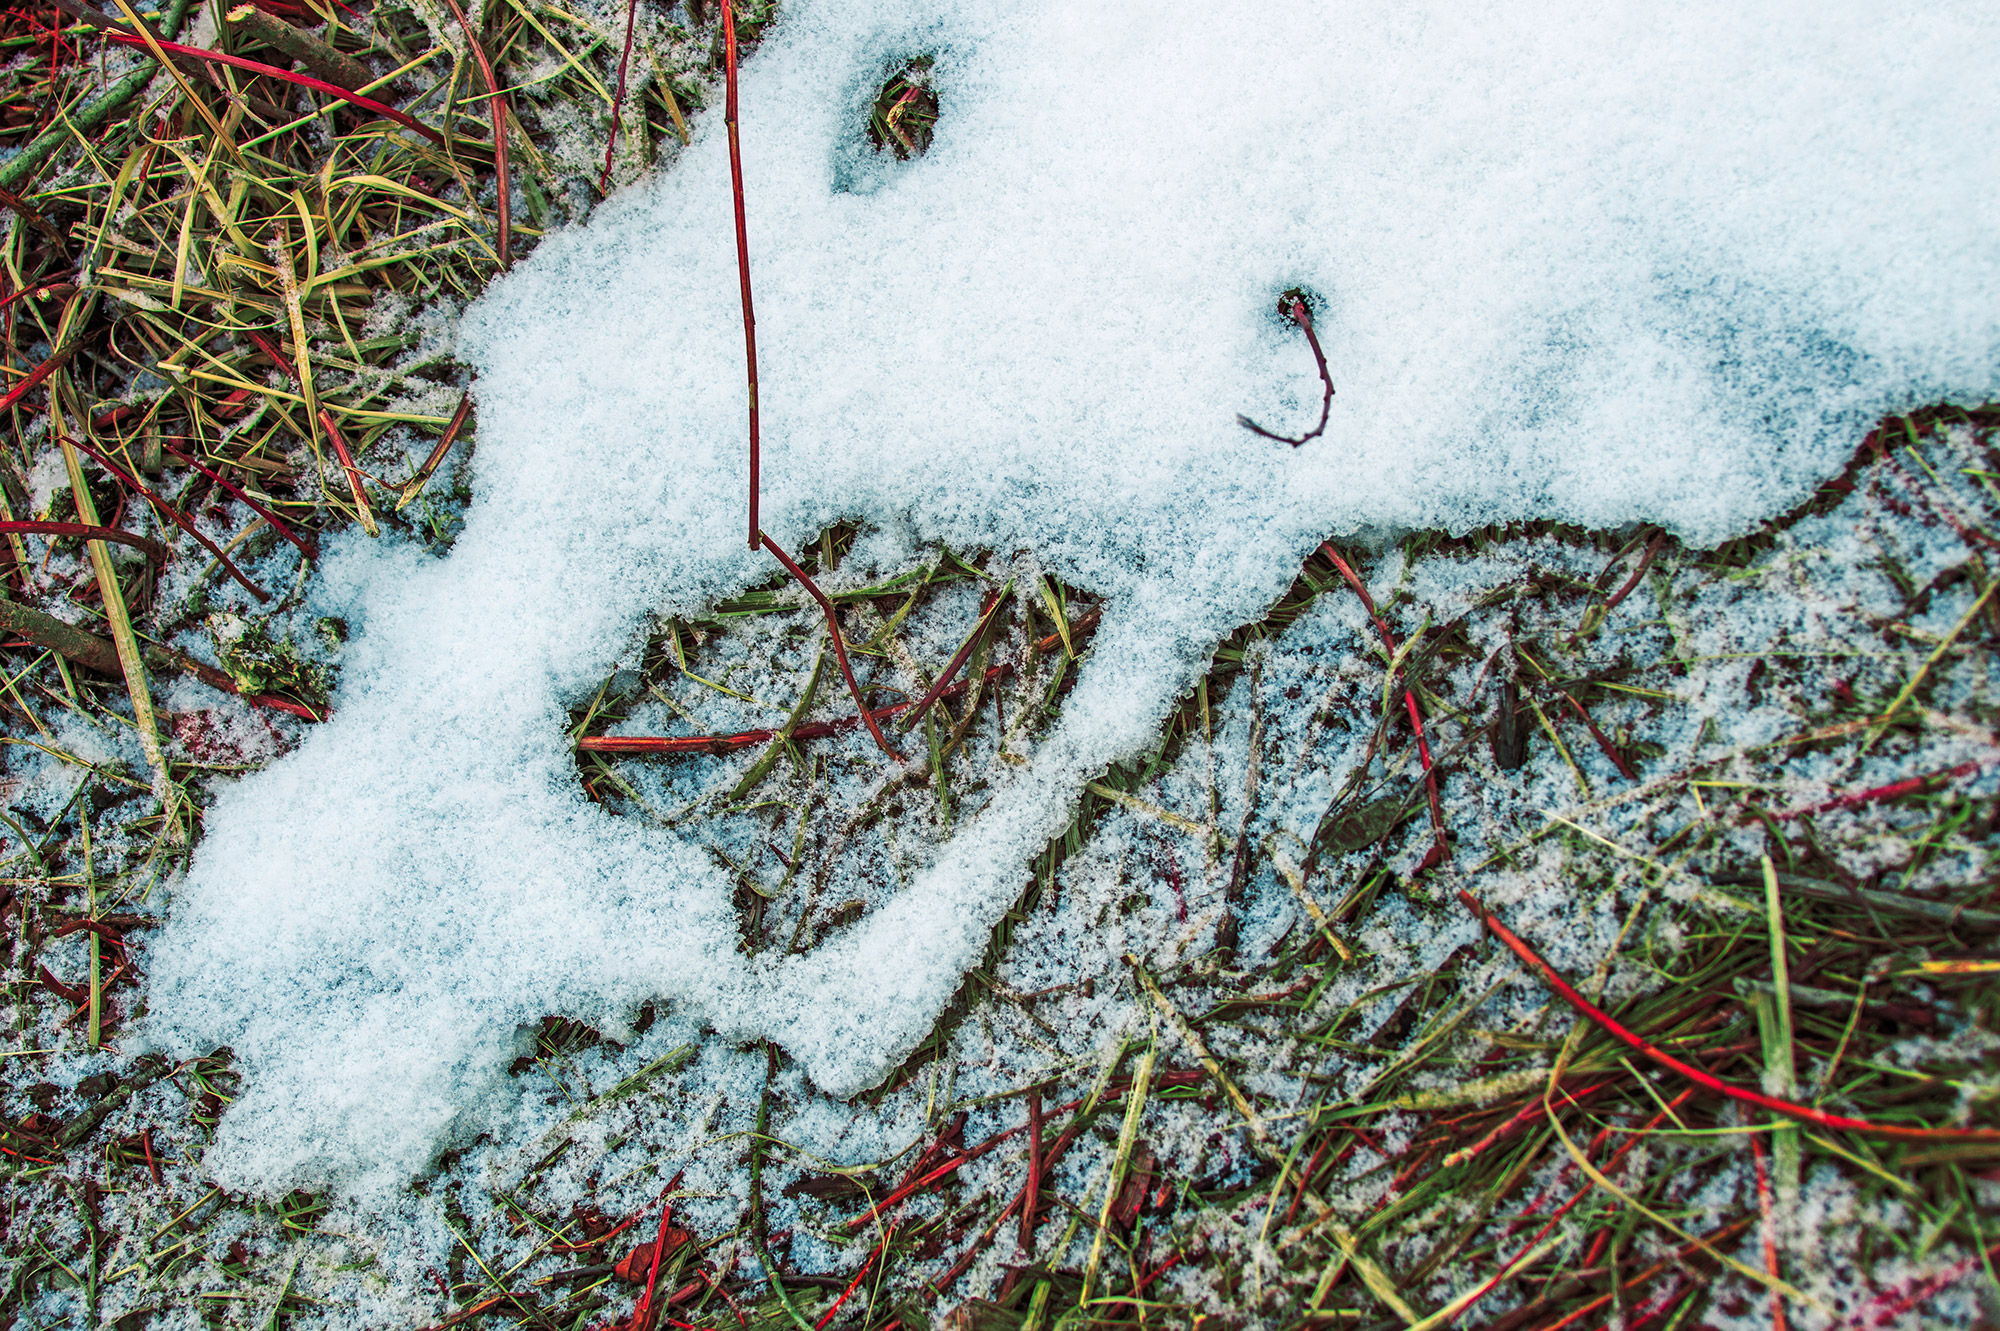 Screaming Stick Eyed Snow Face Among Grass (Color Photo)